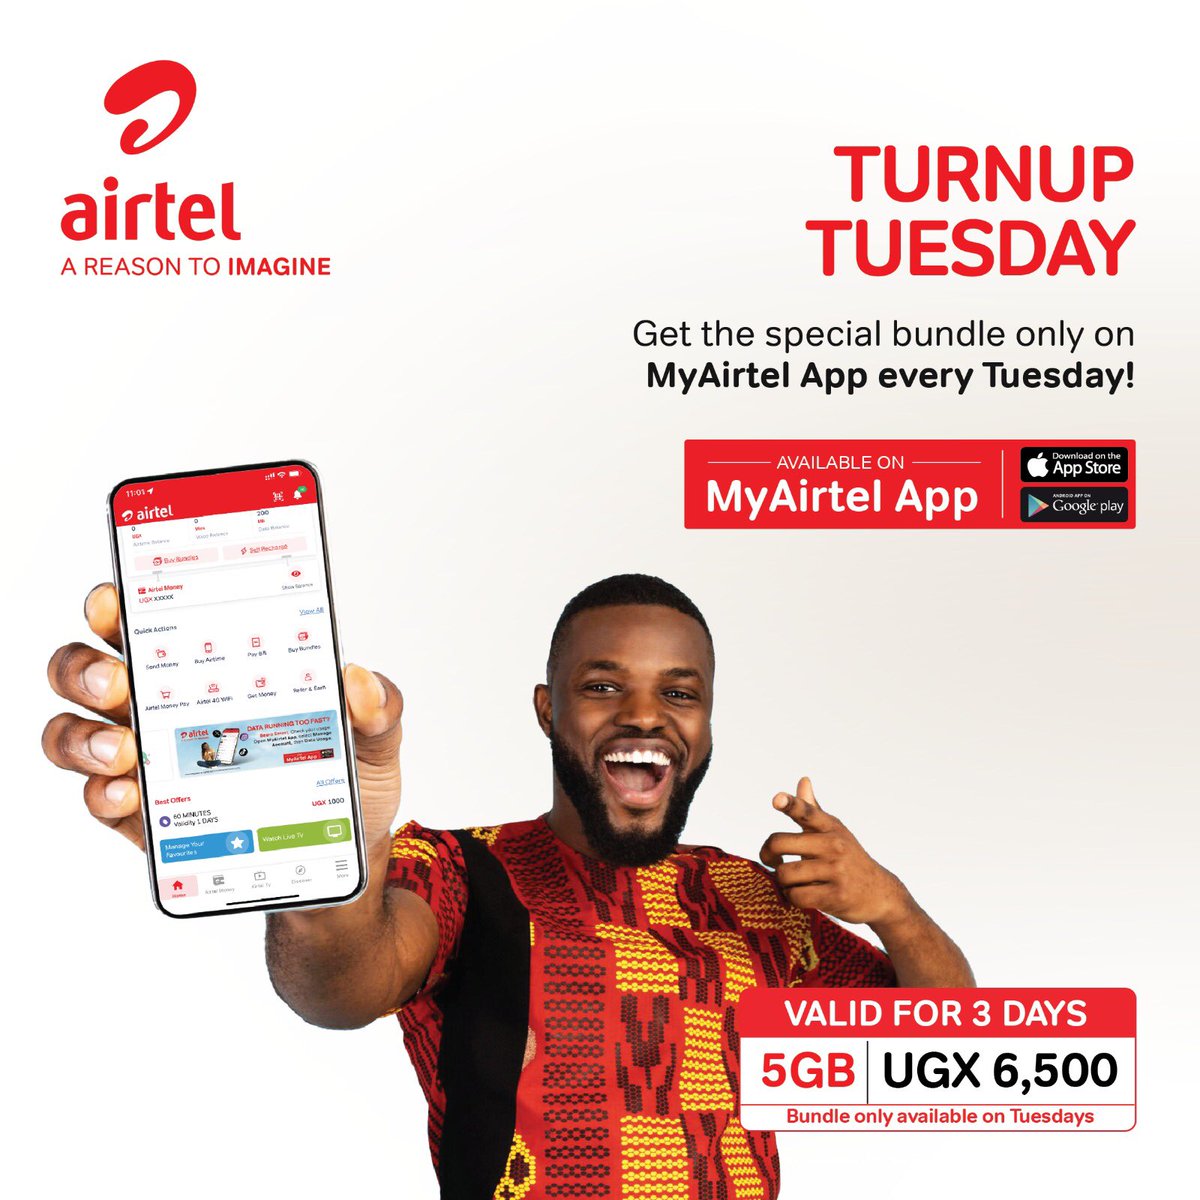 Turn up the heat this #TurnUpTuesday with unbeatable bundles on #MyAirtelApp! Don't miss out on the fun - click the link, Offer available only on #MyAirtelApp.   airtelafrica.onelink.me/cGyr/qgj4qeu2

#TurnUpTuesday 🔥